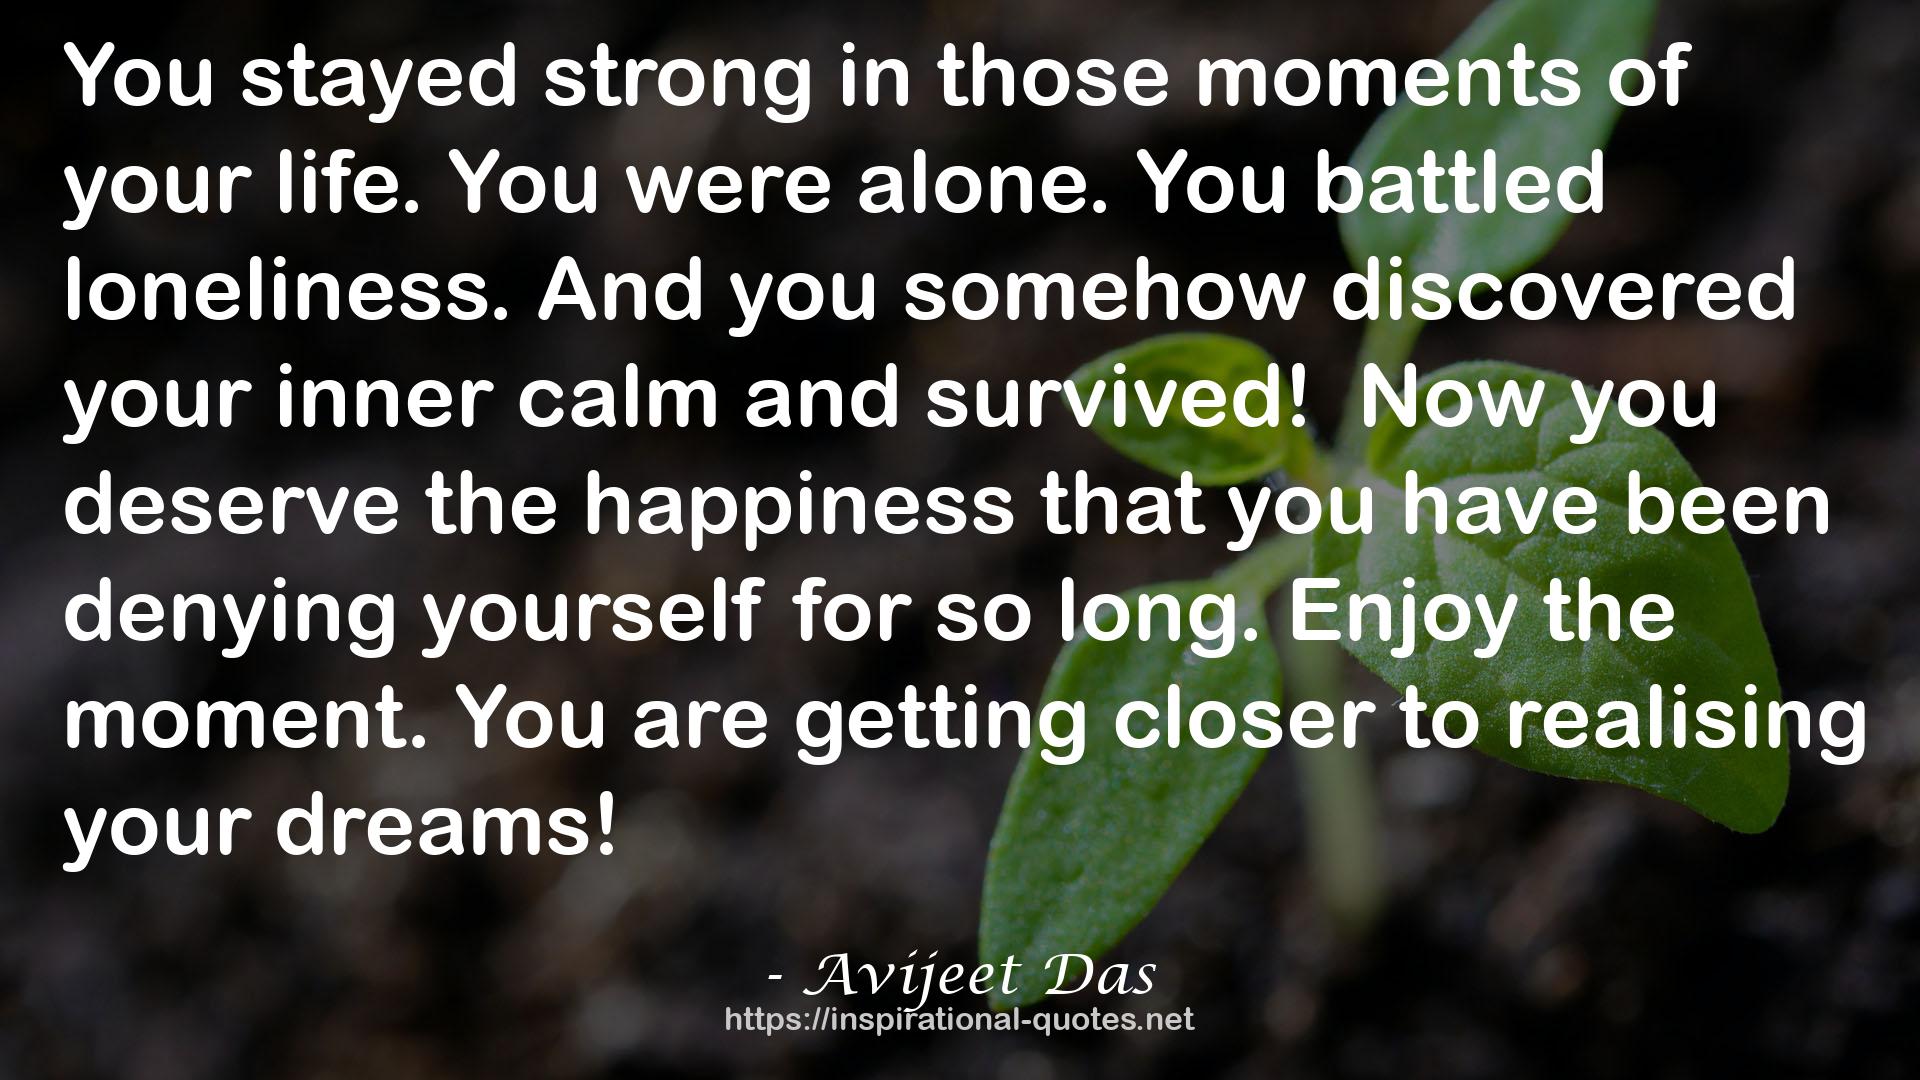 survived!Now  QUOTES